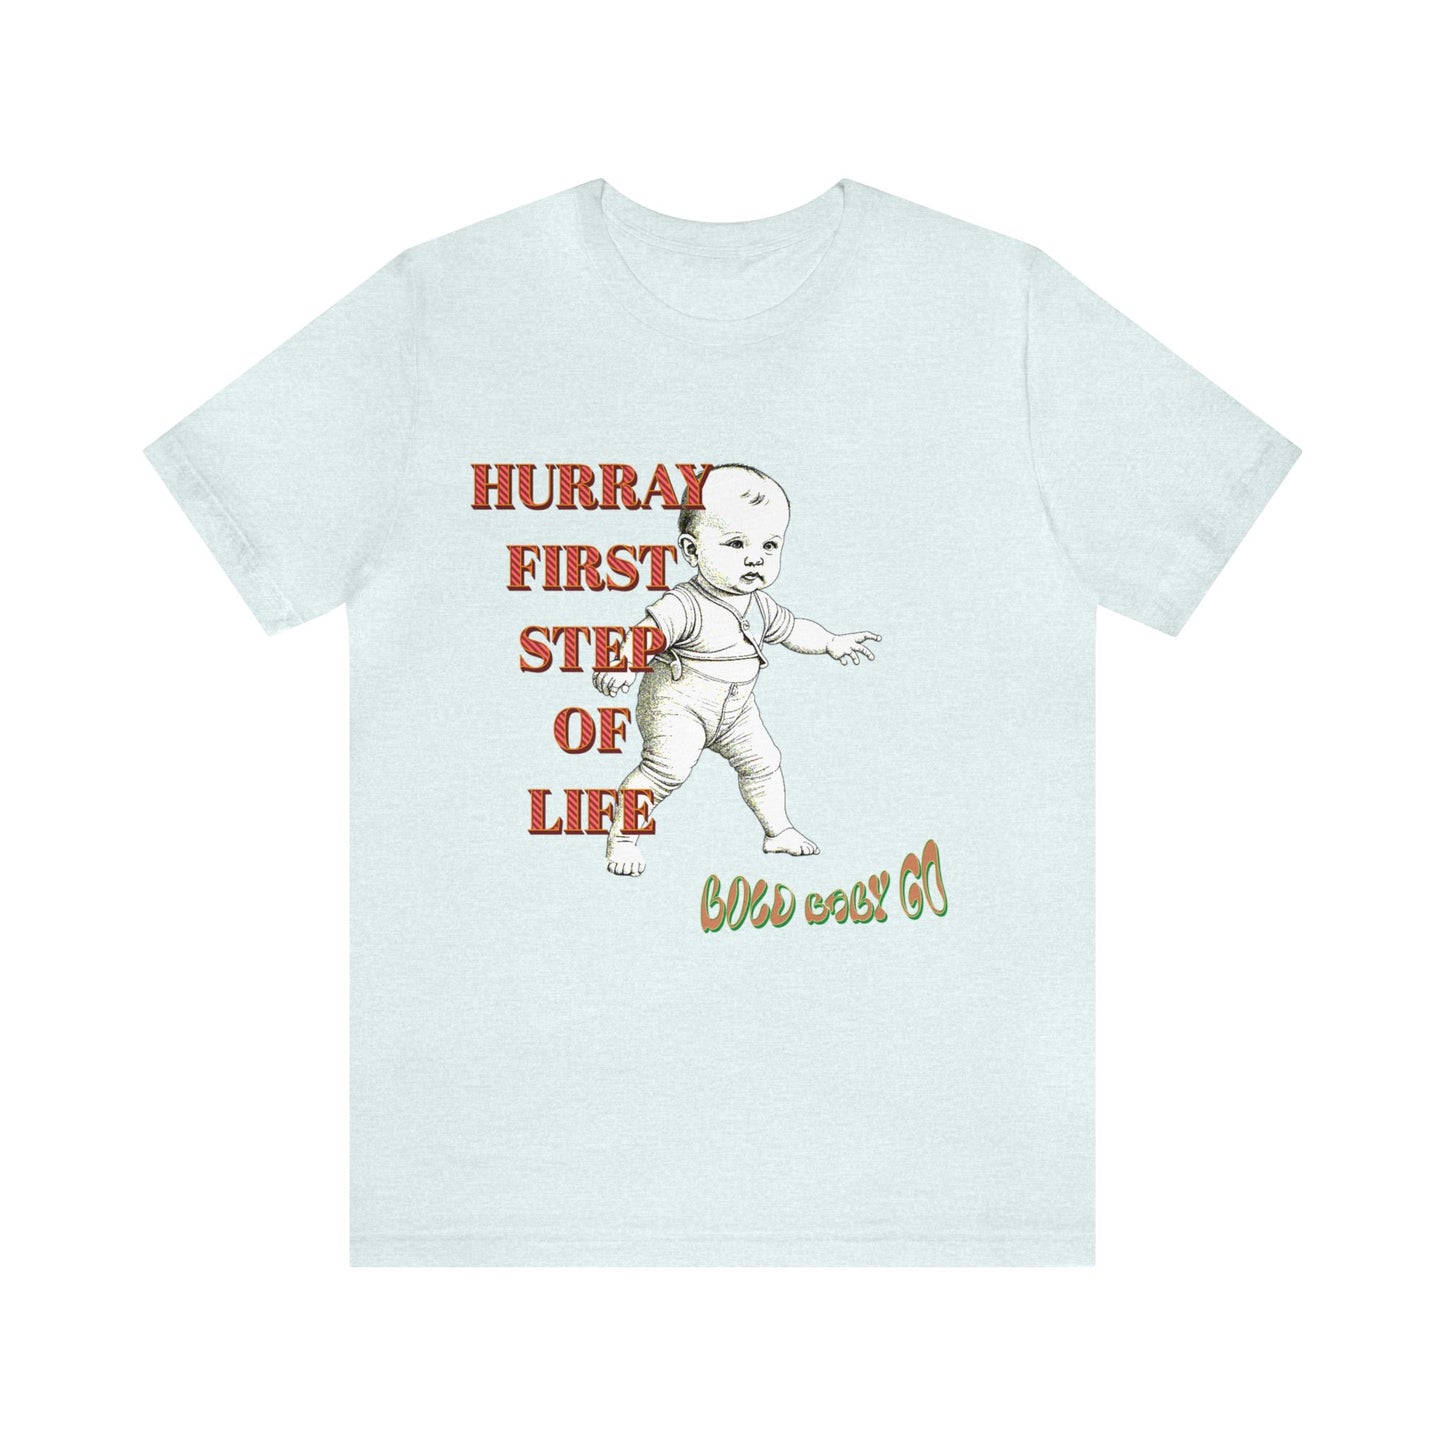 Unisex Jersey Short Sleeve Tee, Hurray First Step Of Life, Bold Baby Go